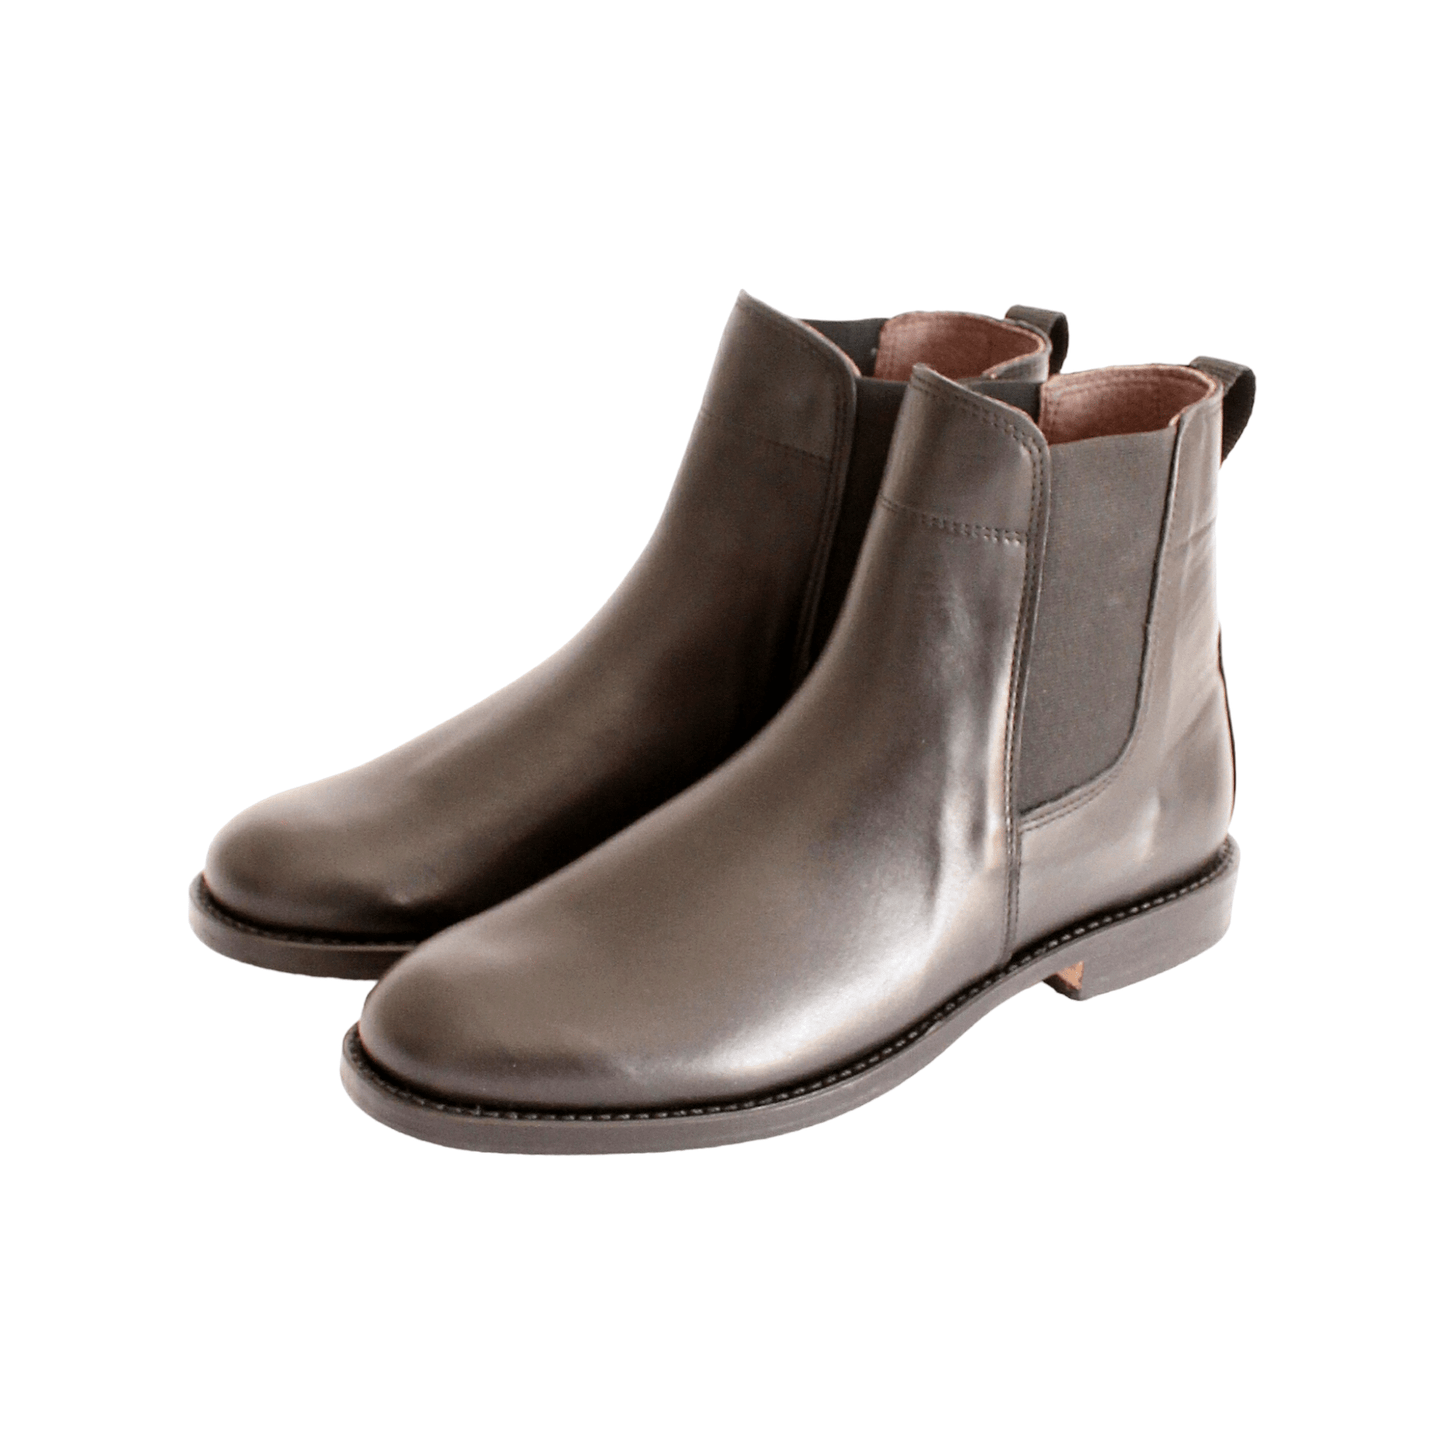 Lima Chelsea Boots - OldMulla - Boots Store, Handmade By George Family